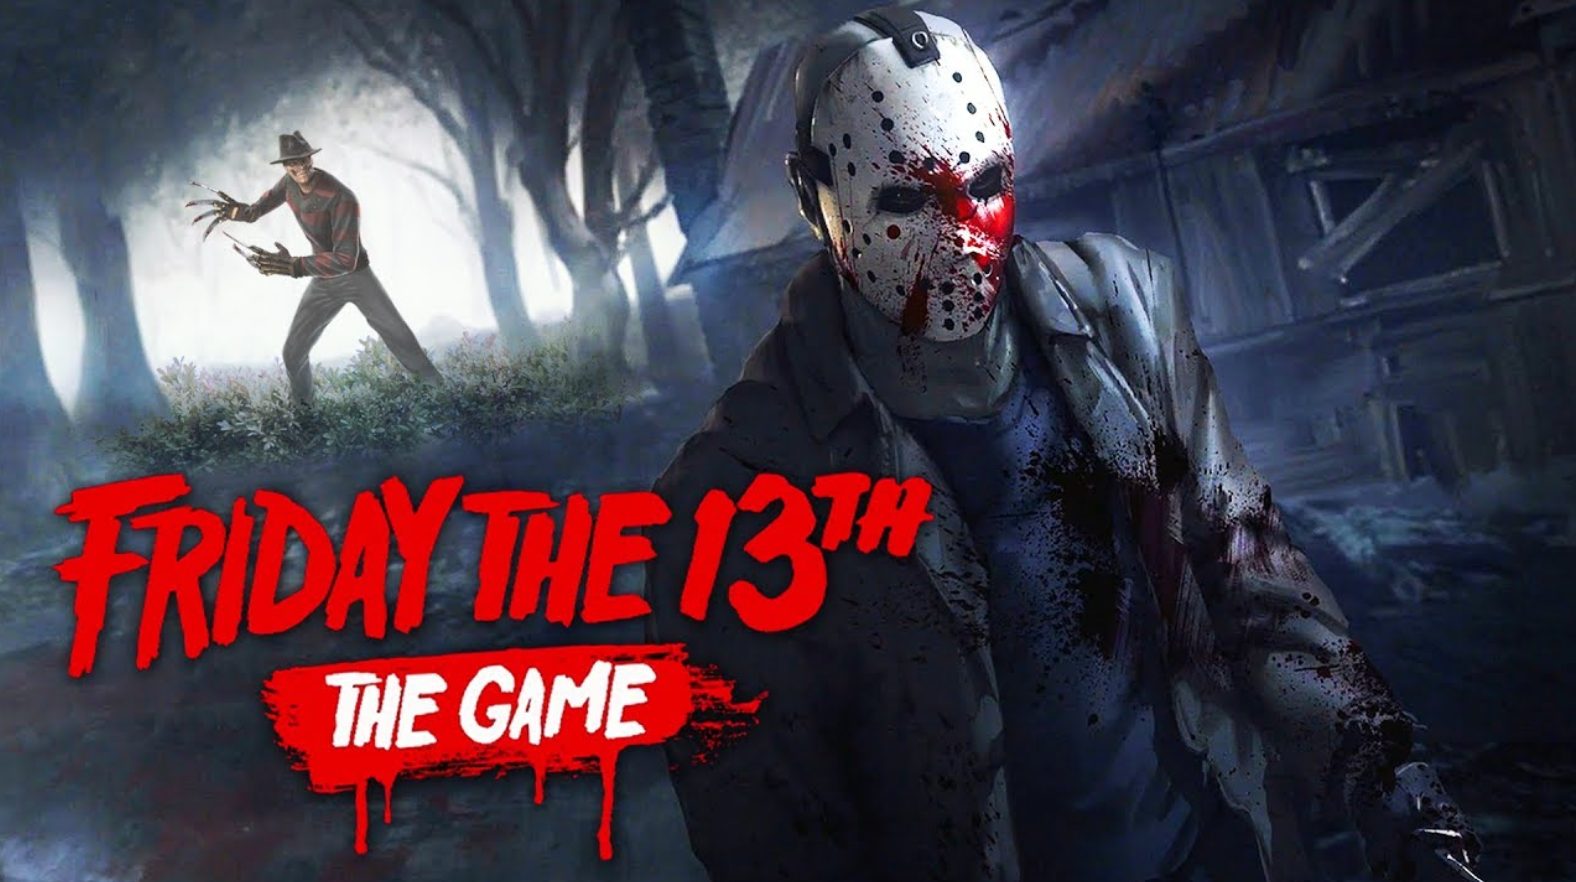 Friday the 13th The Game PS4 Version Full Game Setup Free Download